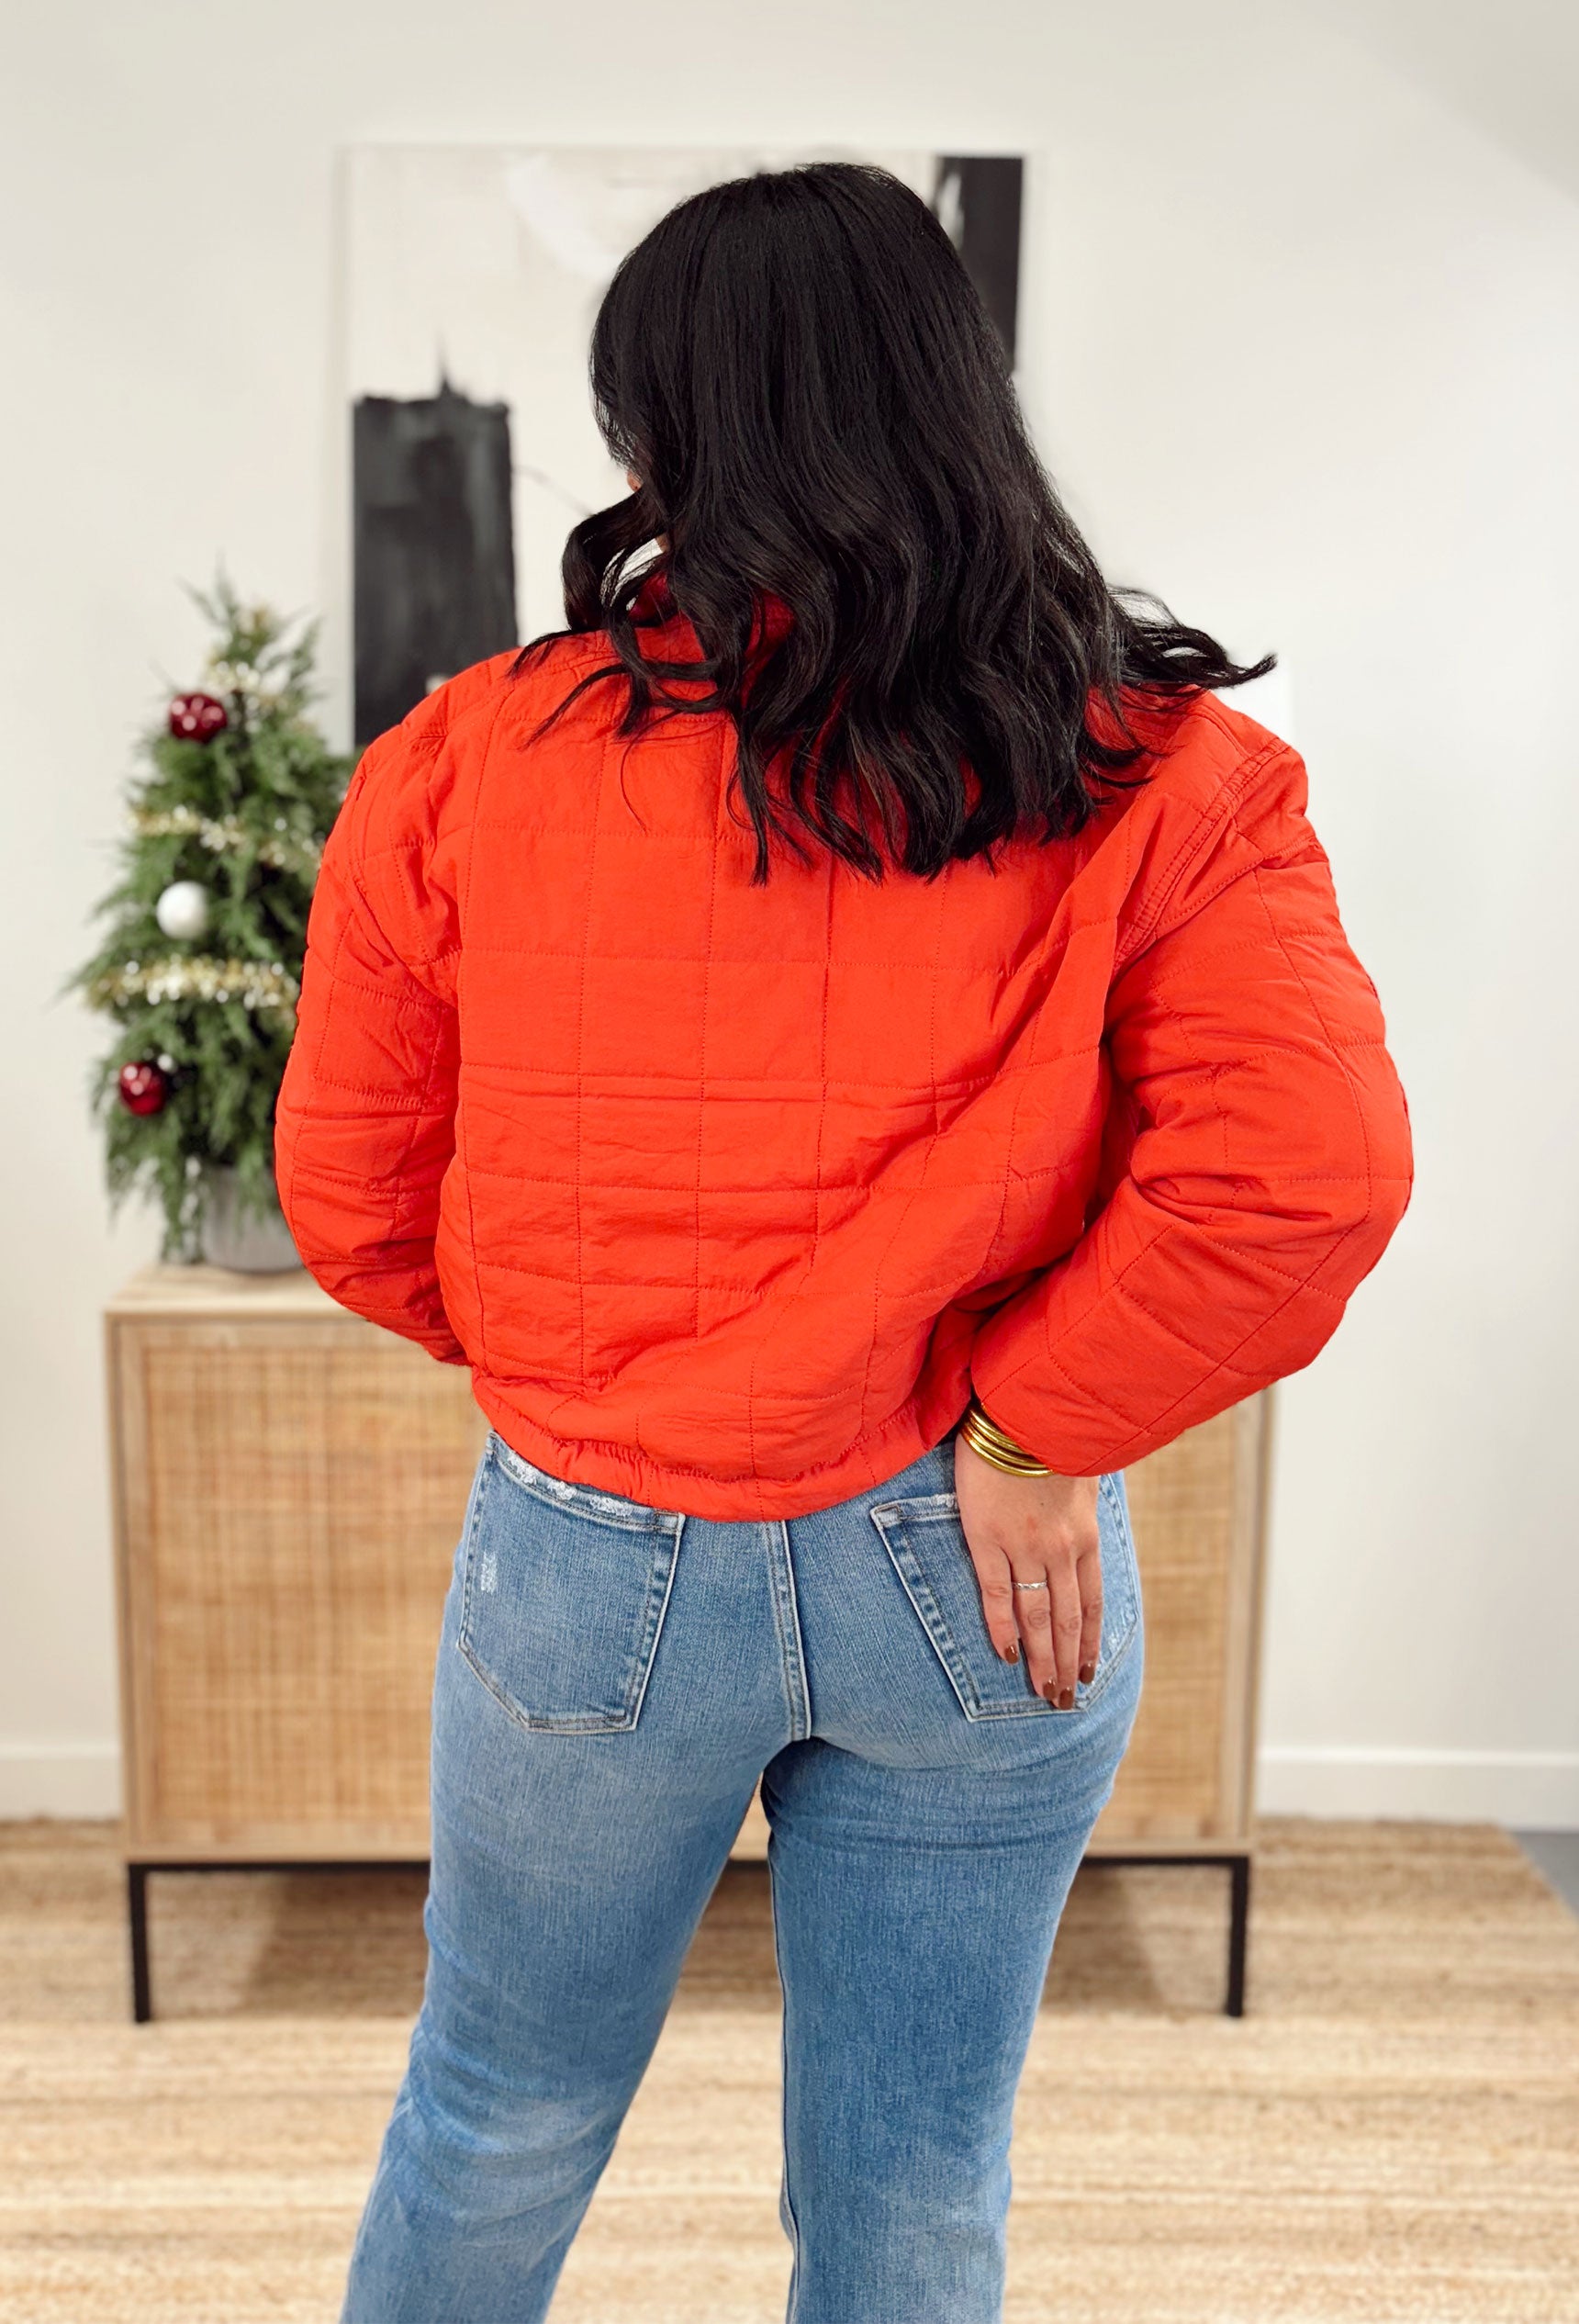 Layers Of Love Jacket in Tomato, quilted puffer zip-up jacket with drawstrings on the waist in tomato red